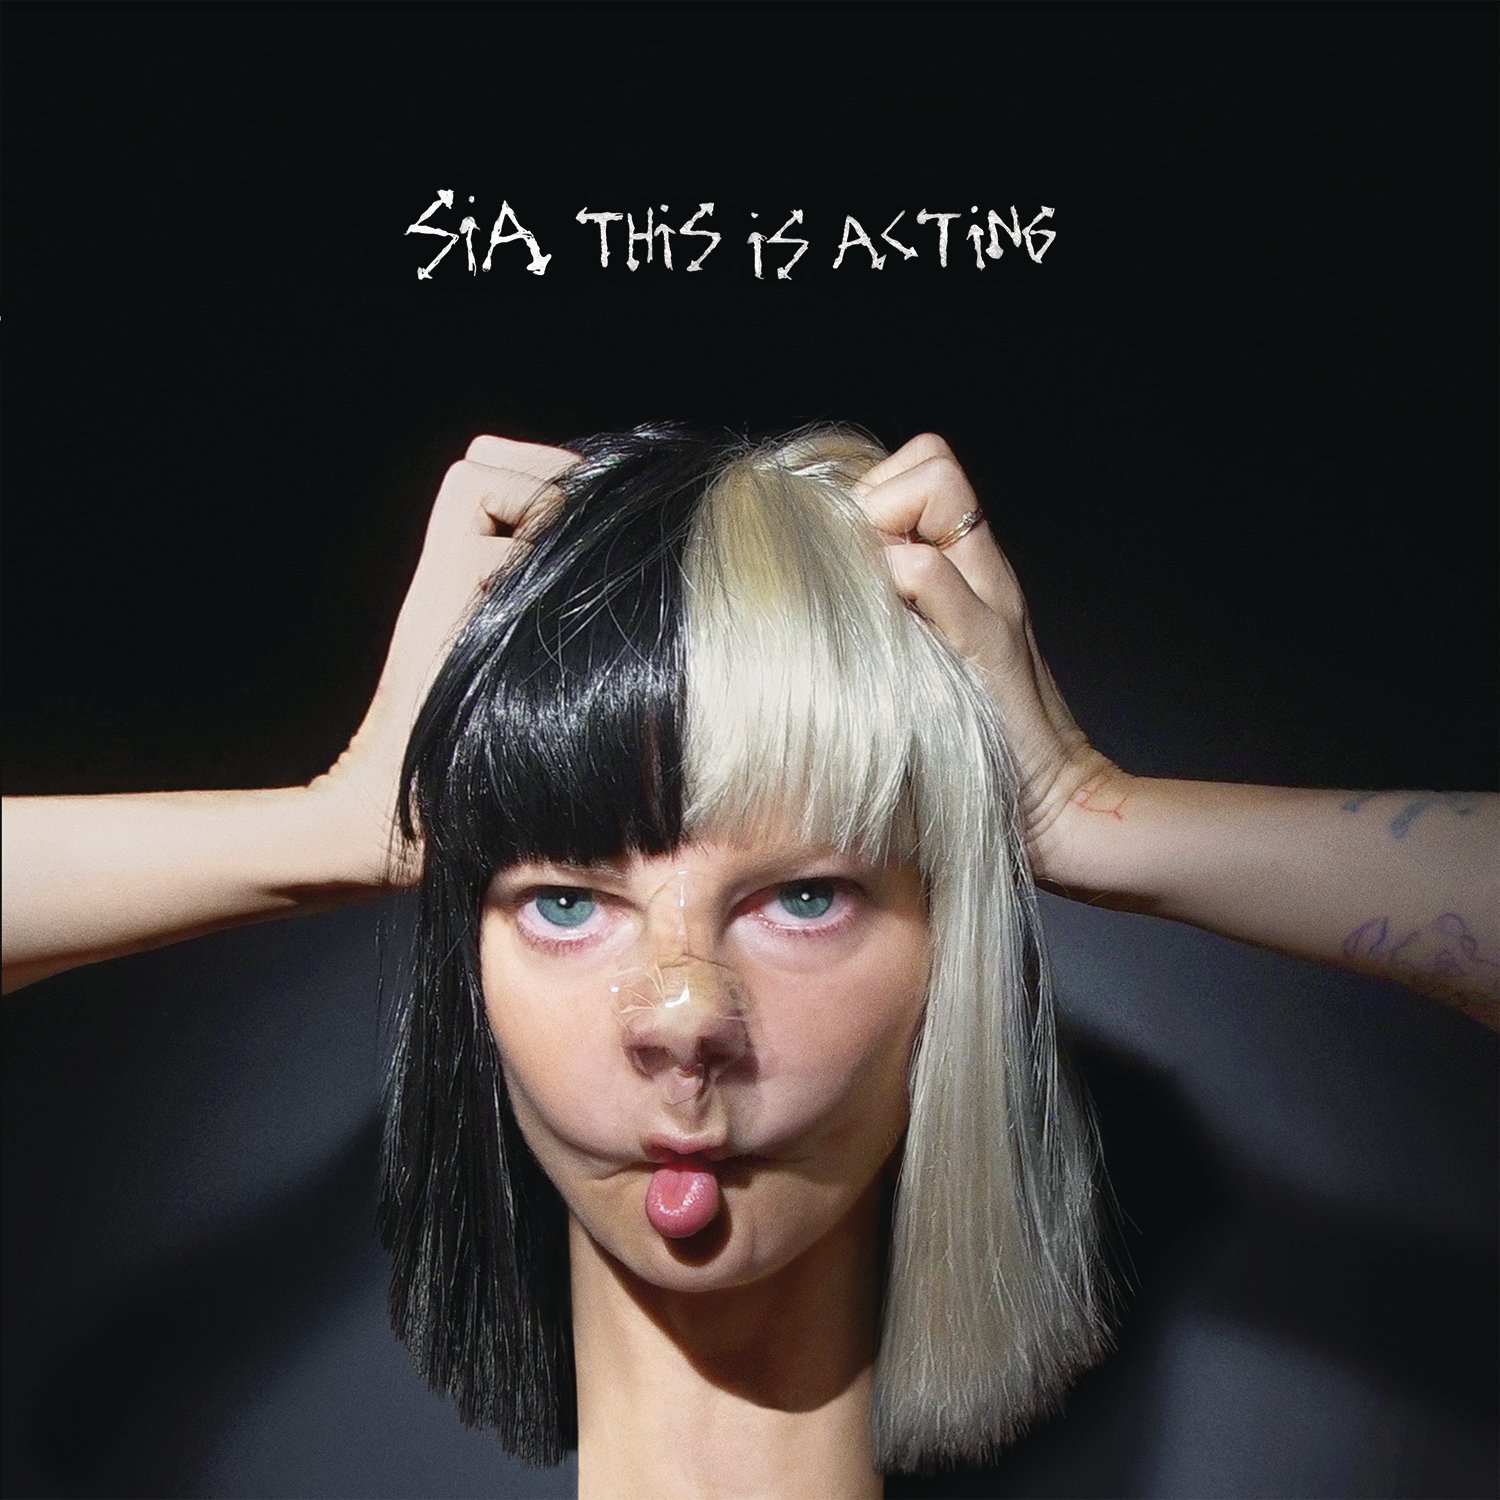 LP Sia - This is Acting (Black & White Coloured) (Gatefold Sleeve) (2 LP)